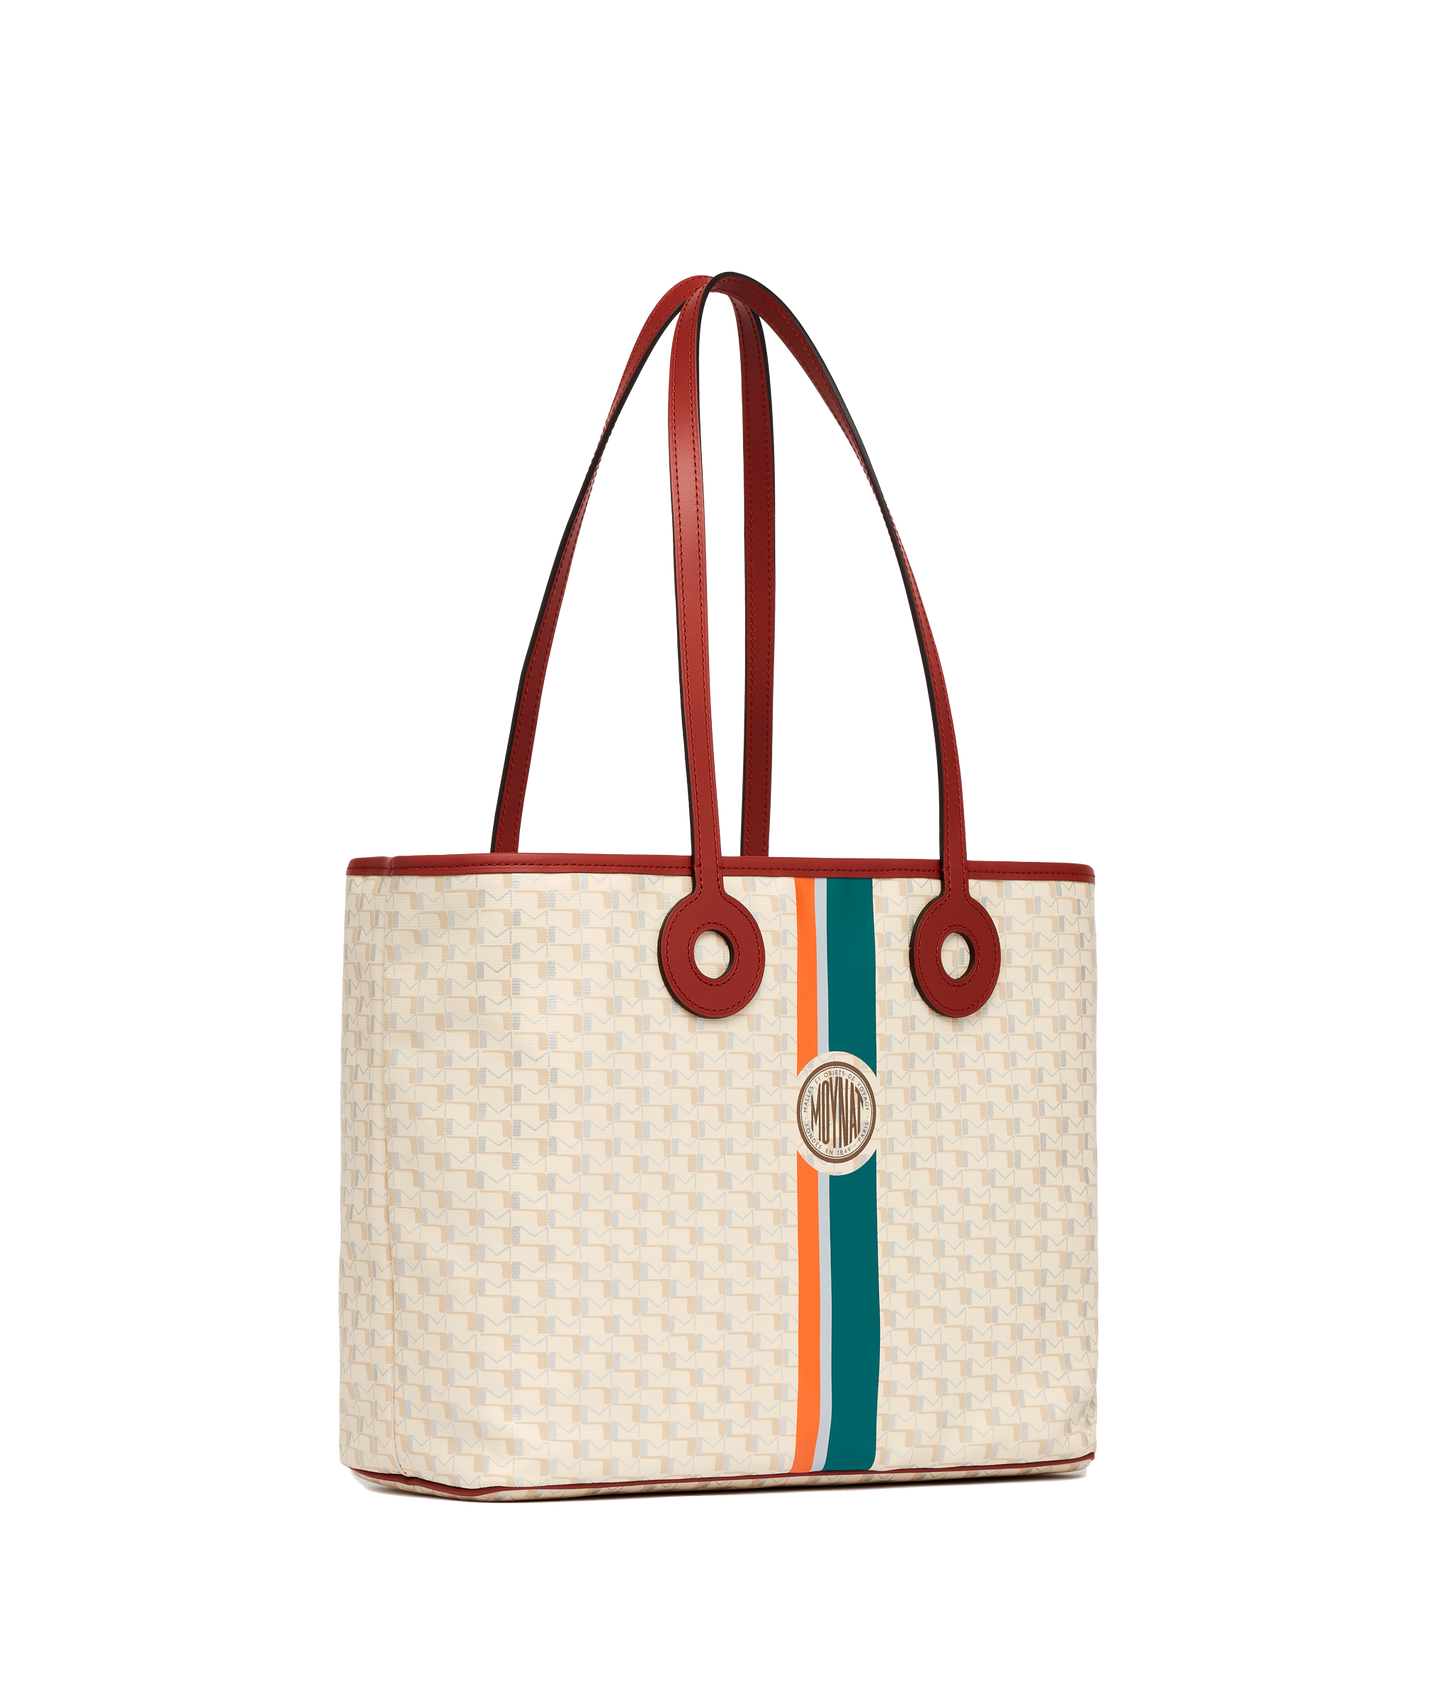 Moynat Neutrals, Pattern Print Coated Canvas Tote Bag